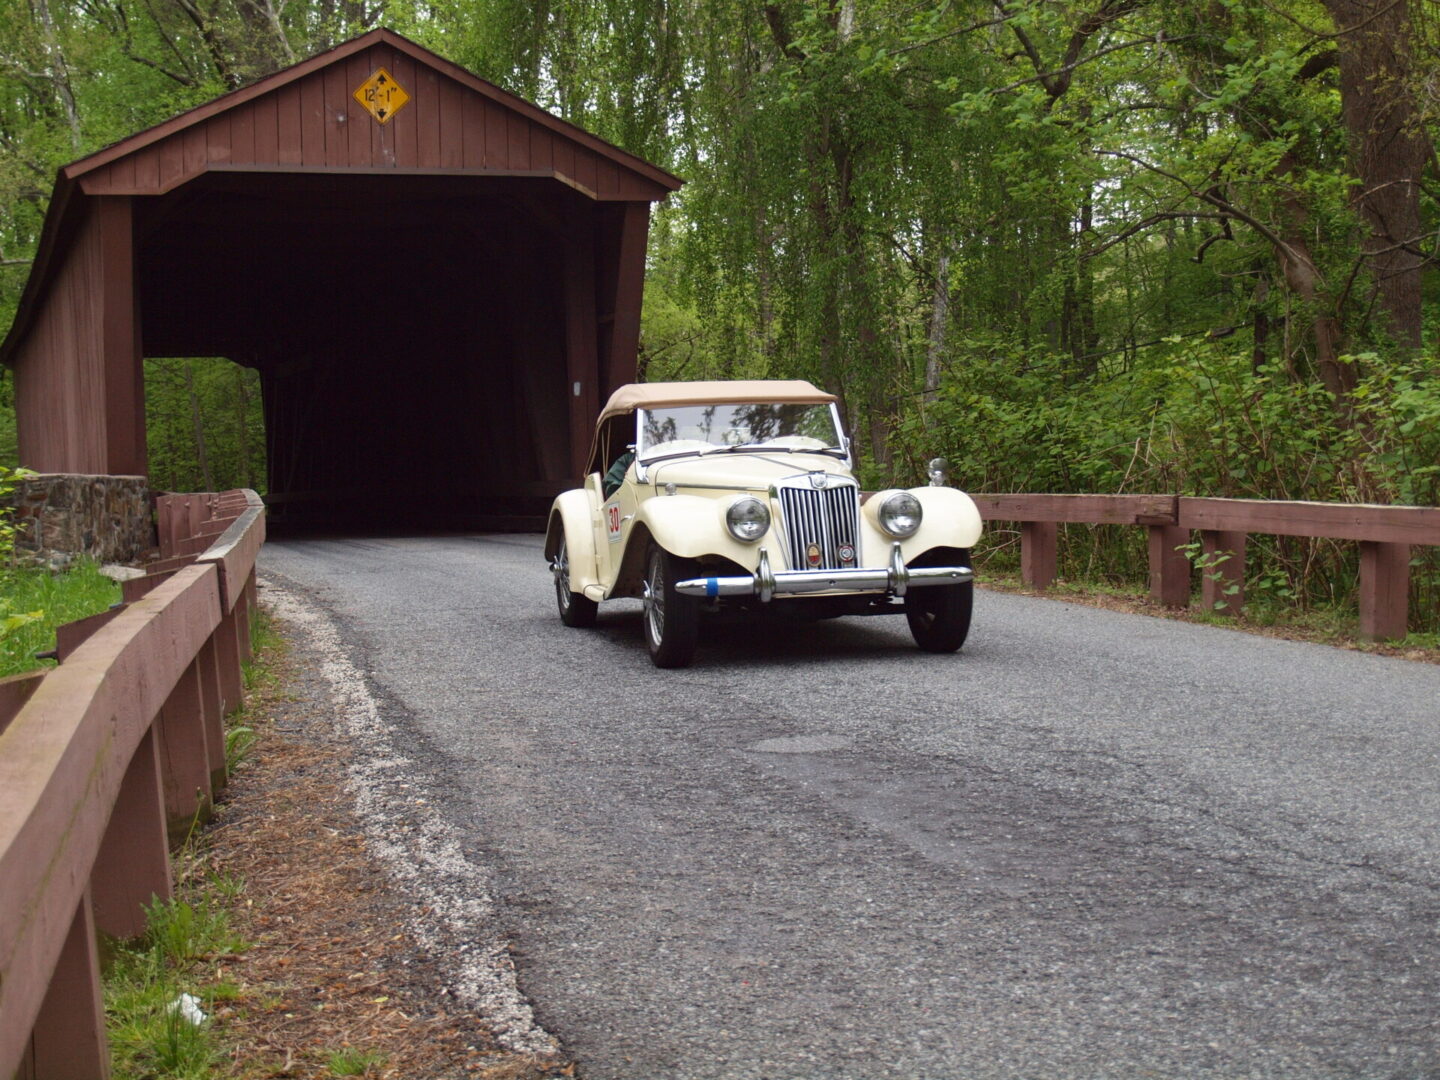 A car driving down the road under a covered bridge.